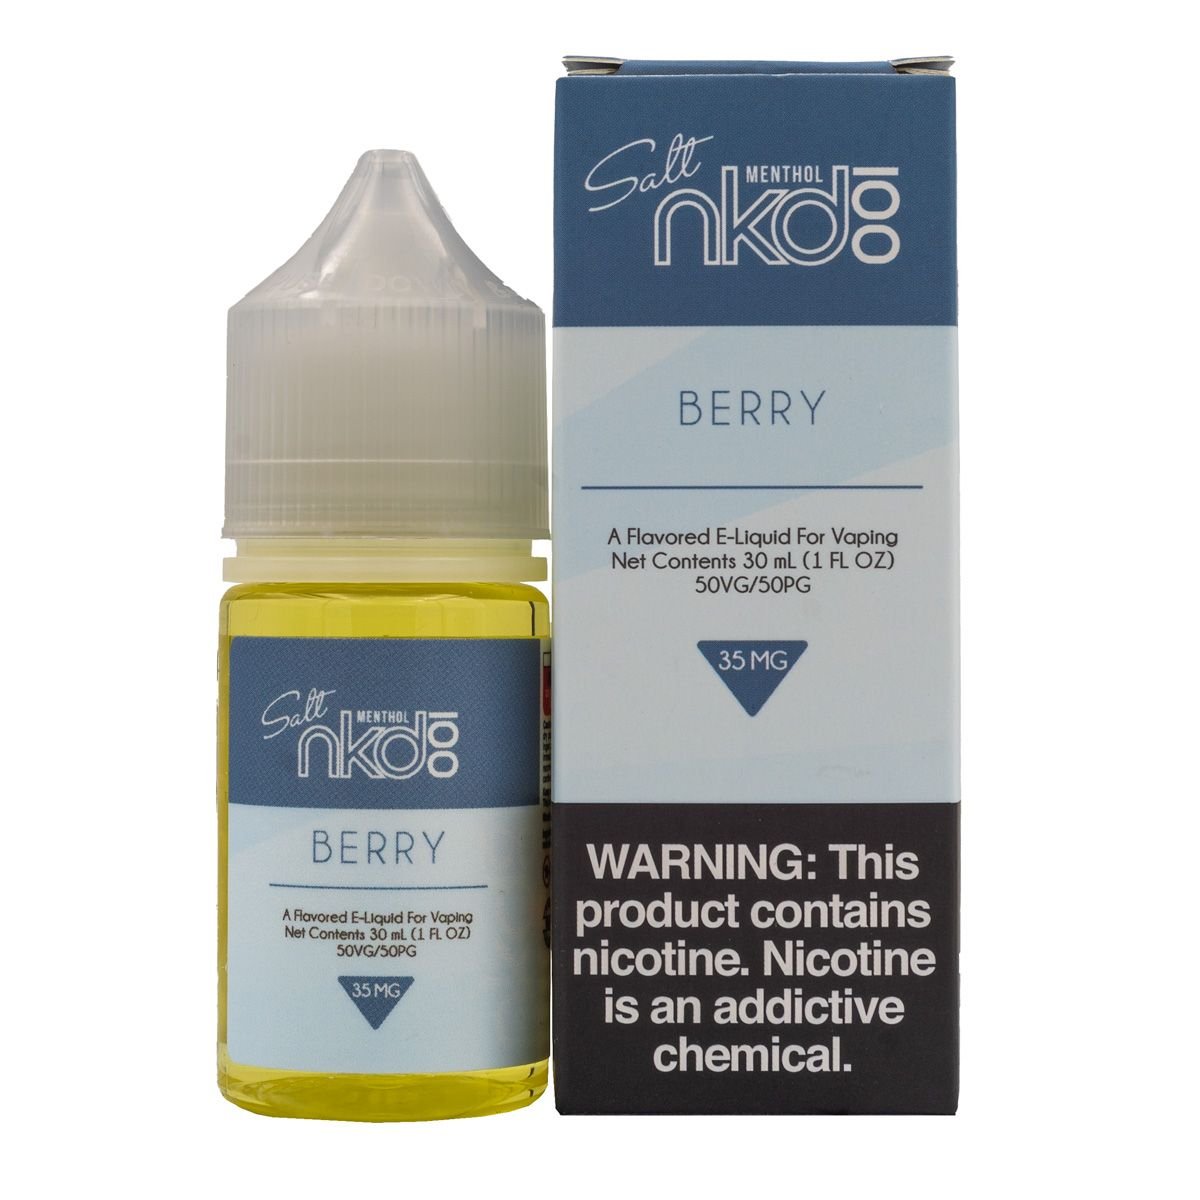 BERRY (Very Cool) by NKD 100 Saltnic 30ML - EJUICEOVERSTOCK.COM